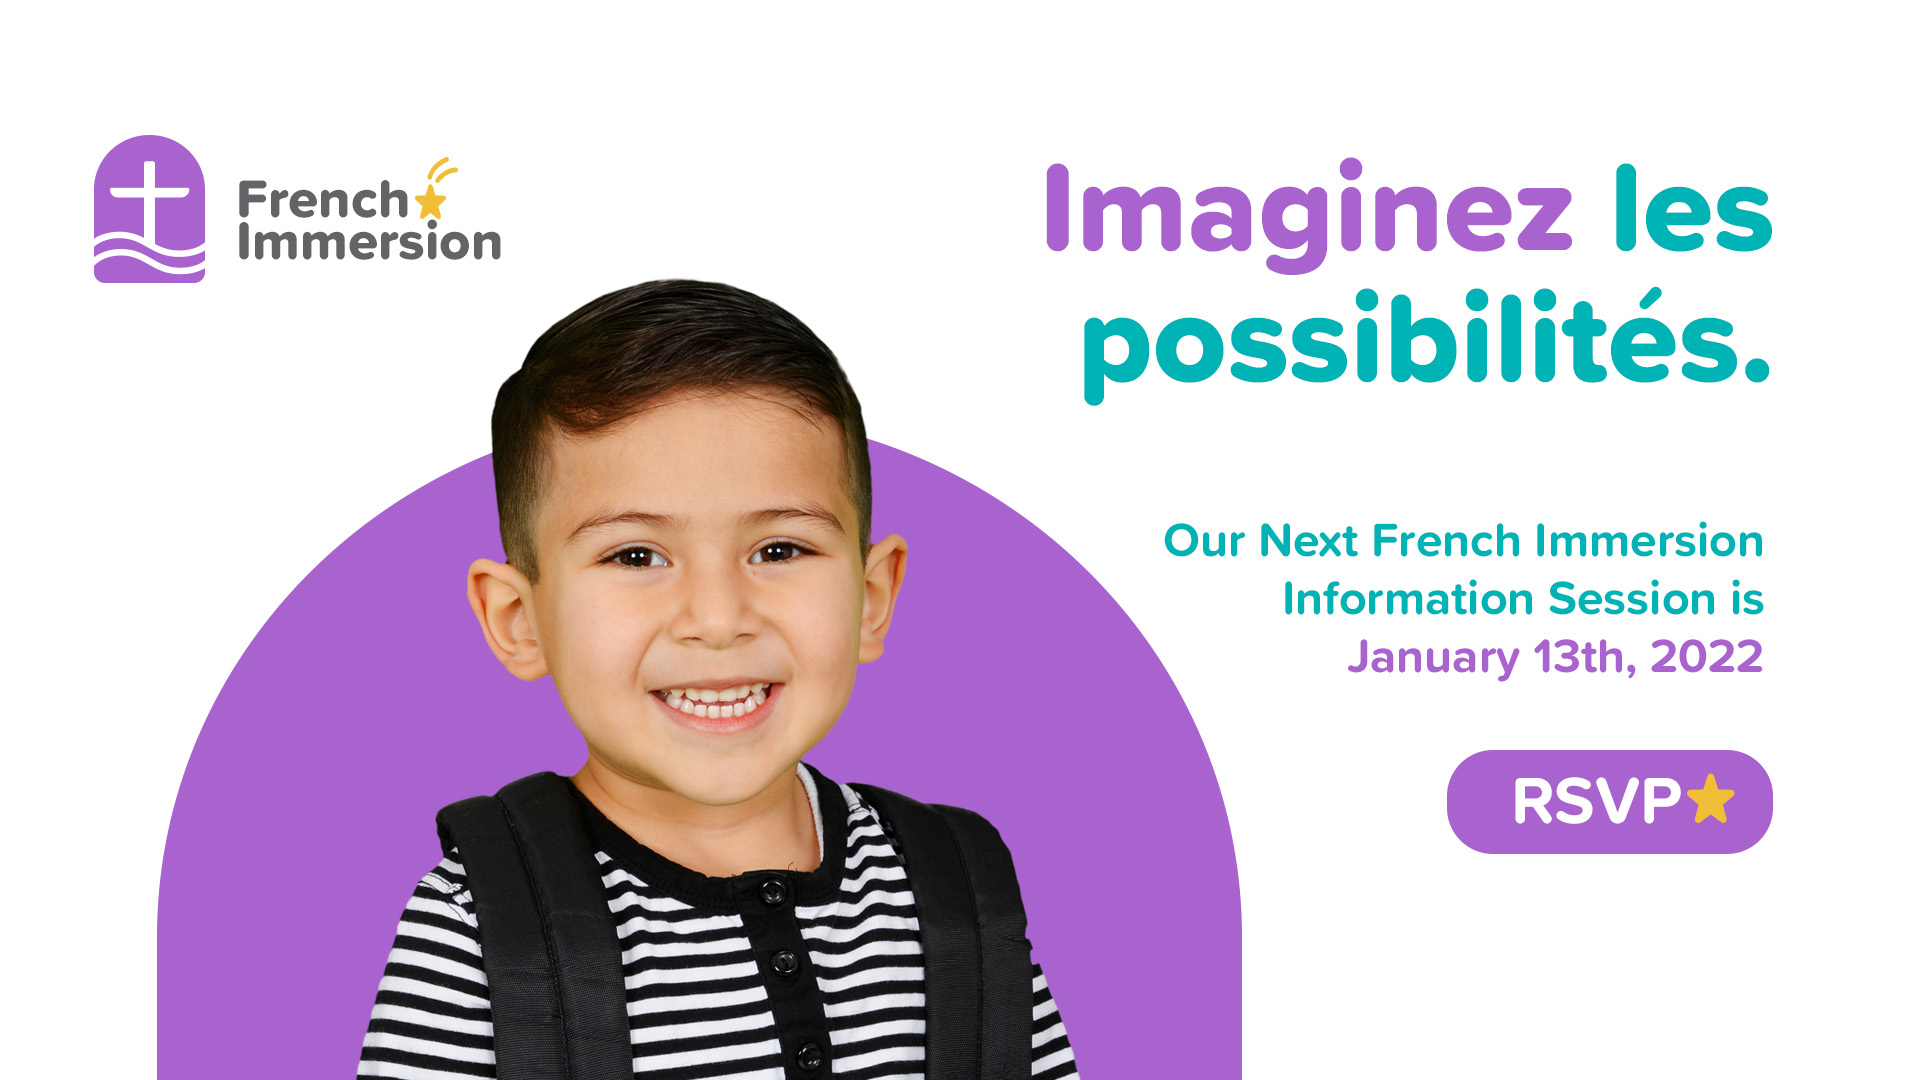 Join the KinderSTARt Team’s French Immersion Information Session